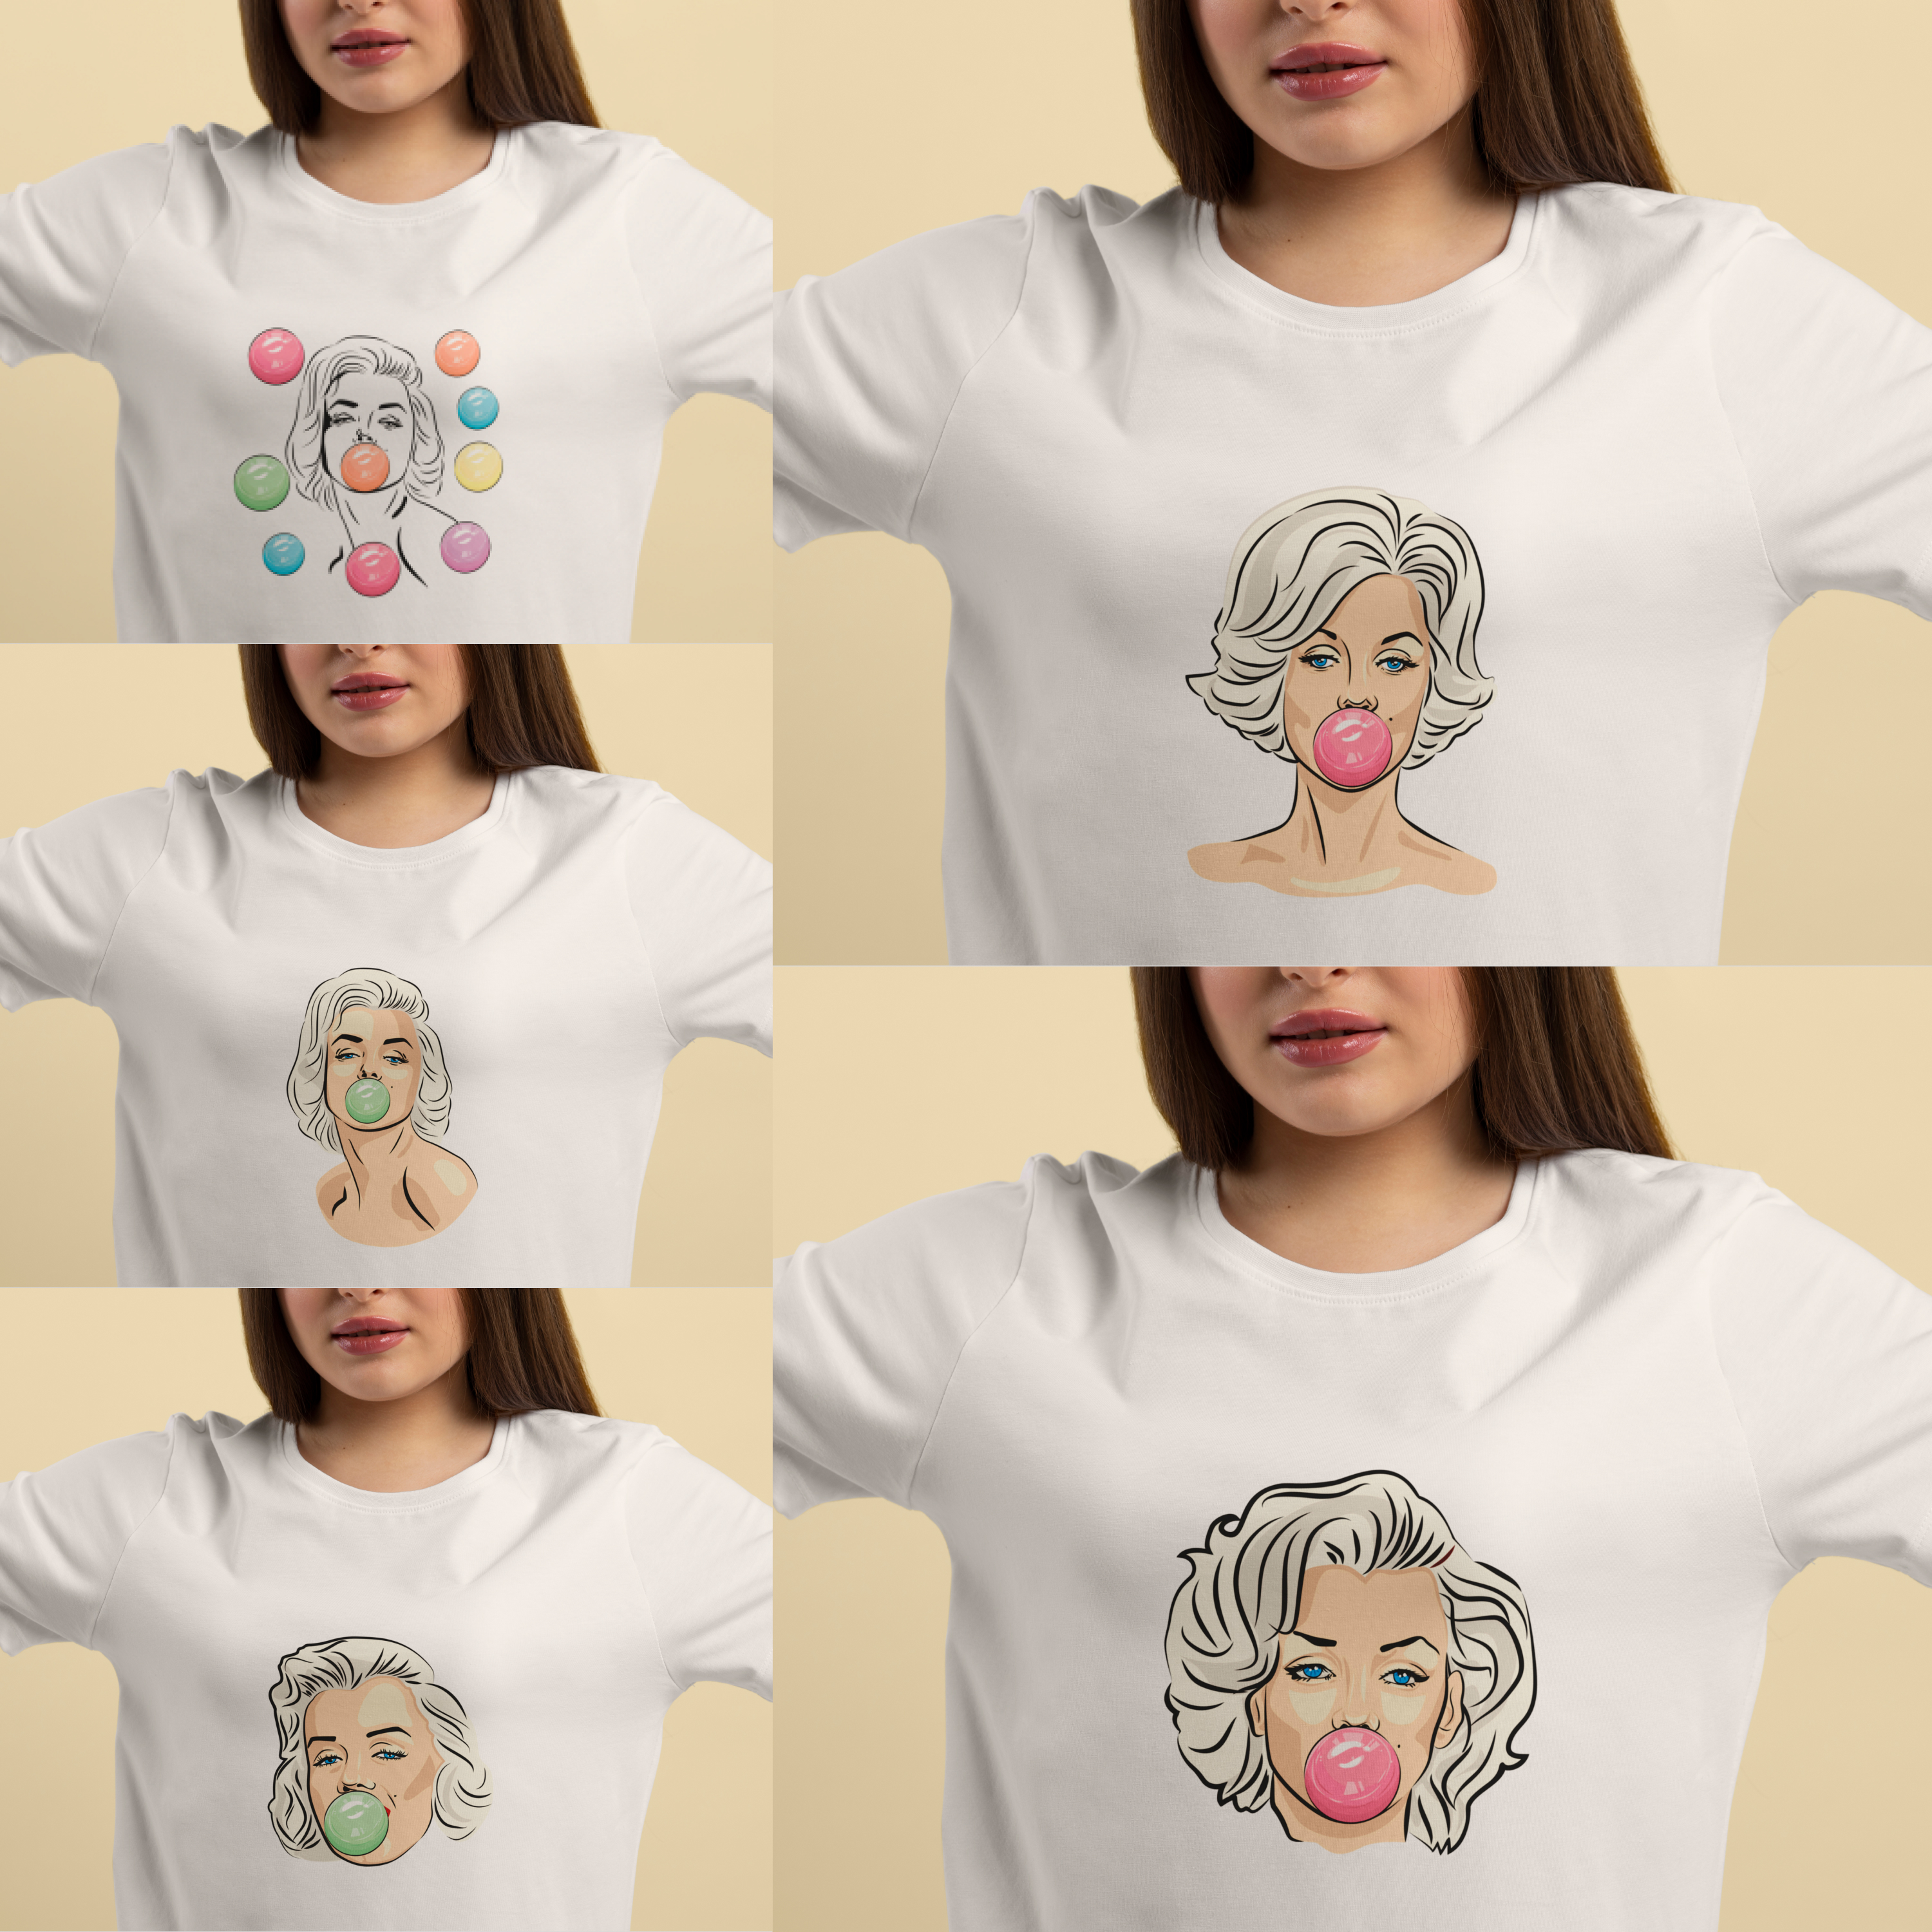 A set of images of t-shirts with a gorgeous print of Marilyn Monroe with bubble gum.